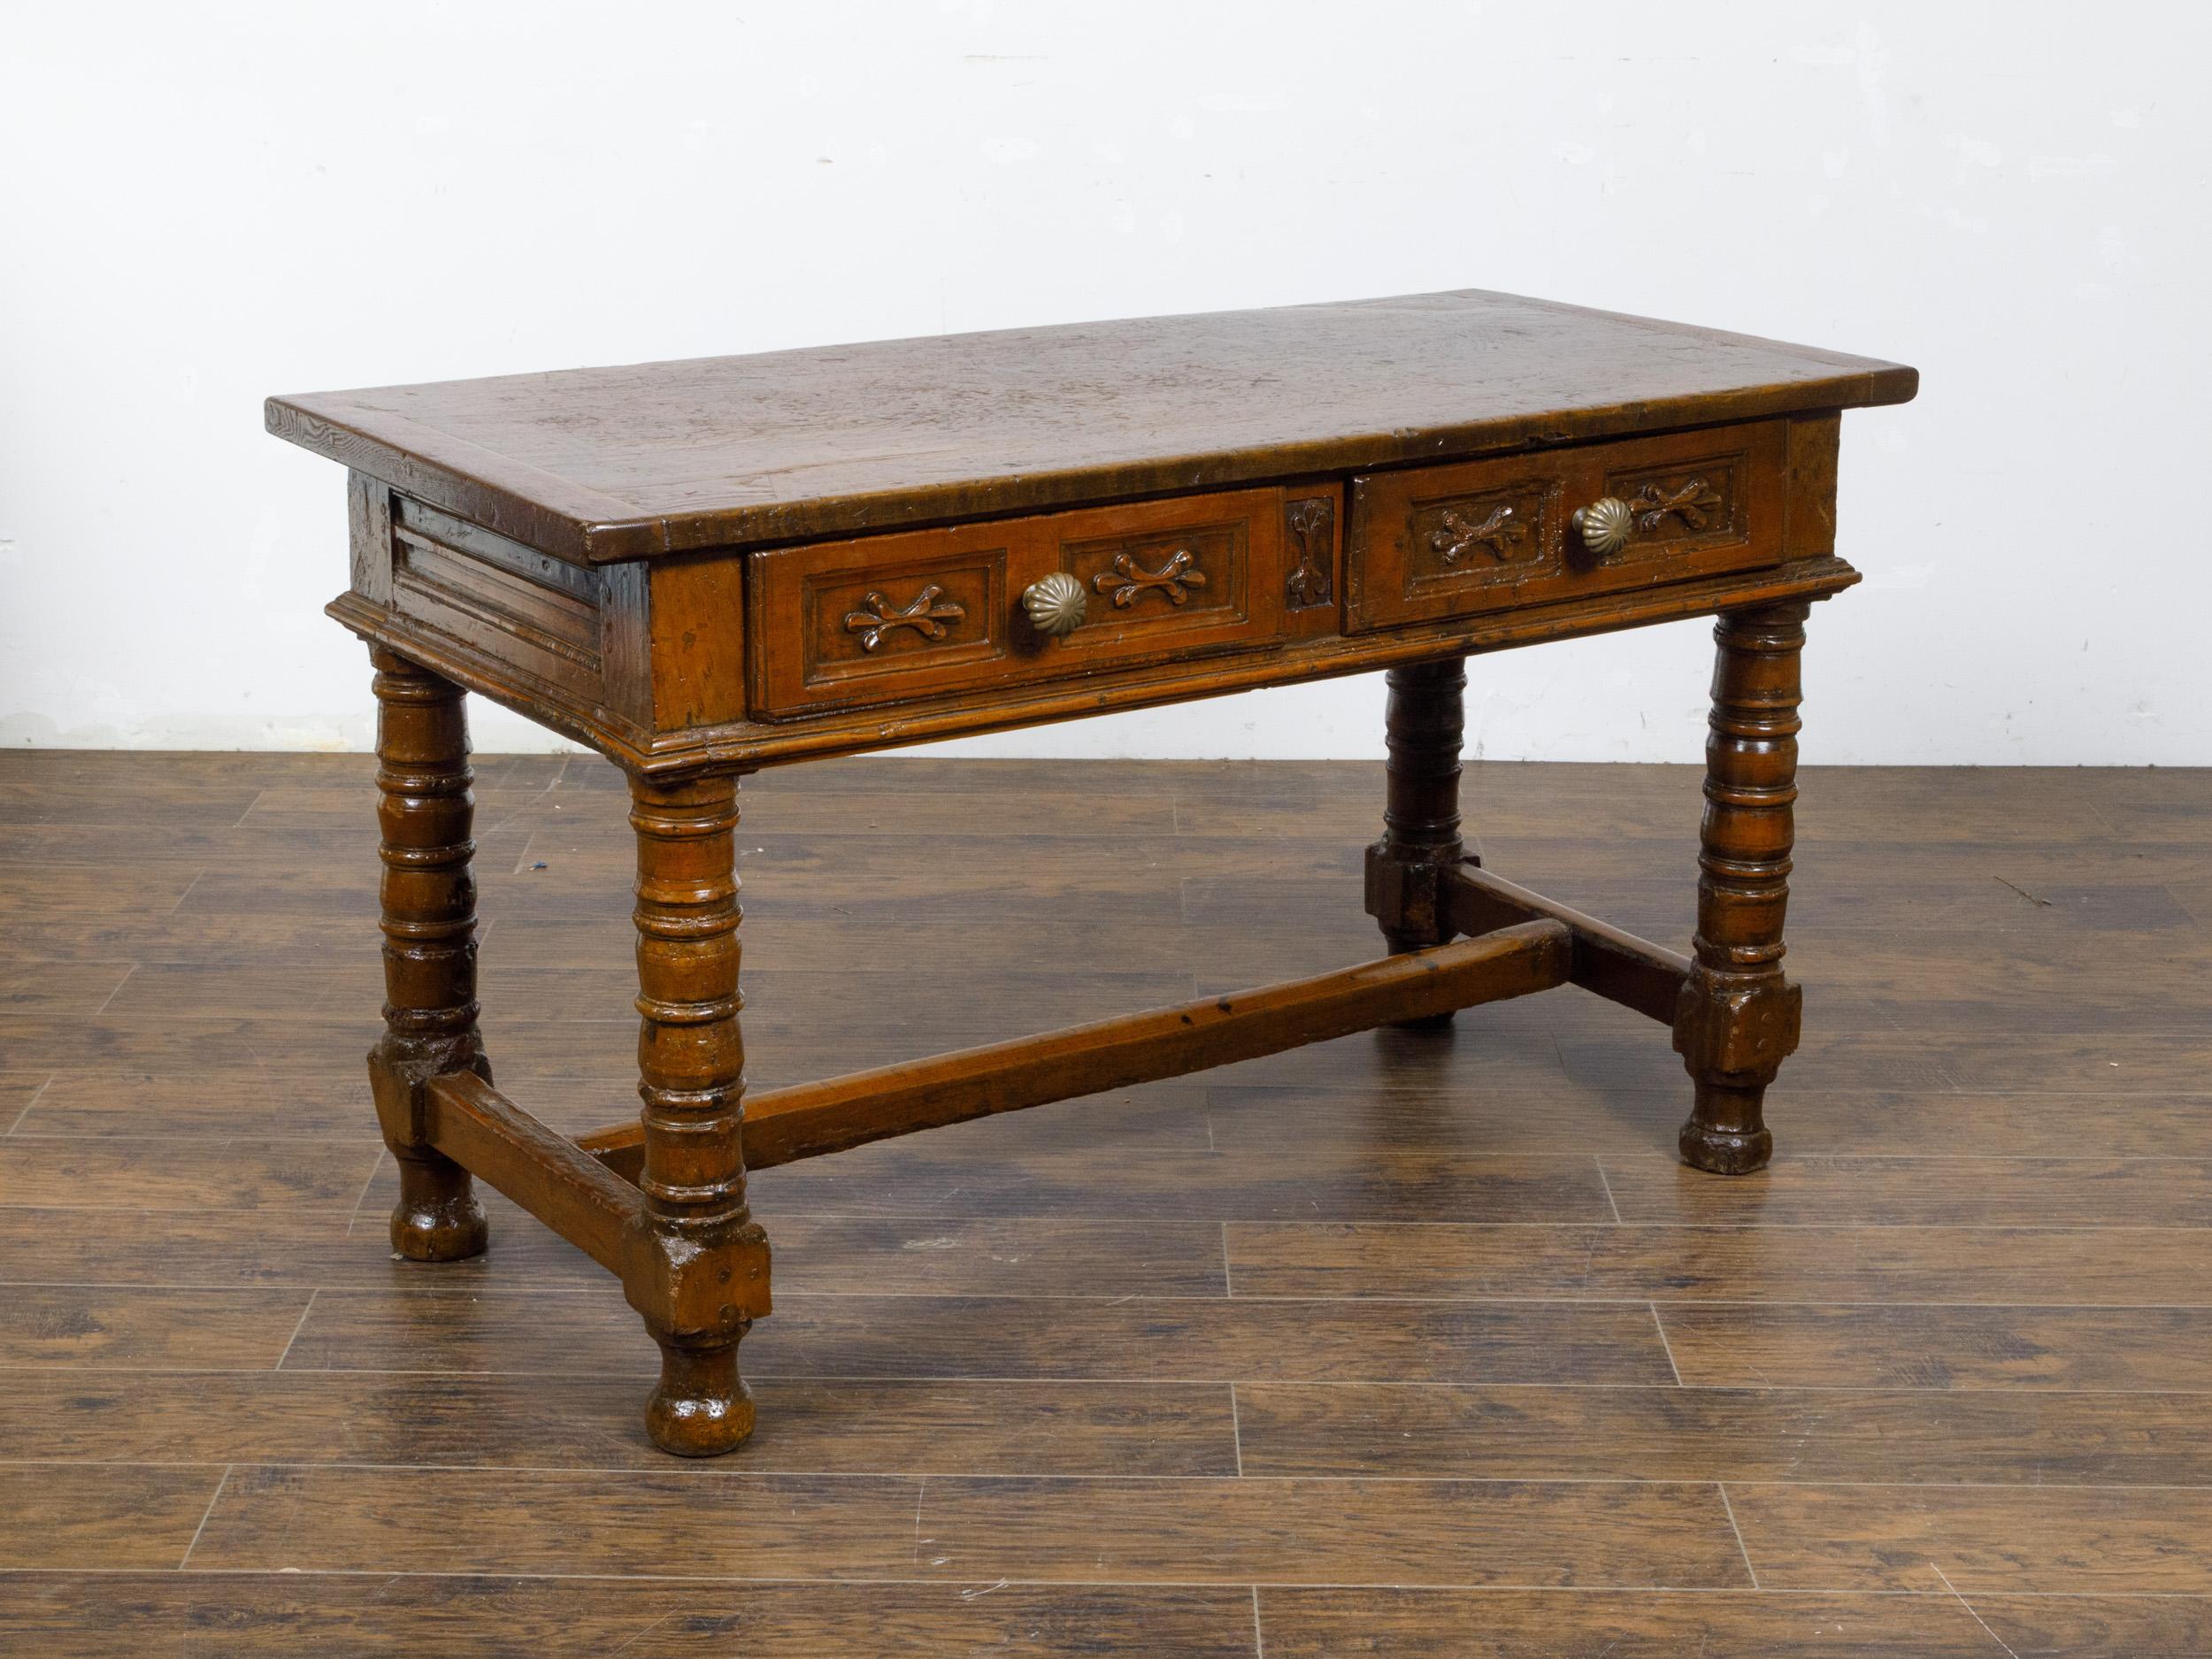 18th Century Spanish Walnut Console Table with Carved Drawers and Baluster Legs For Sale 3